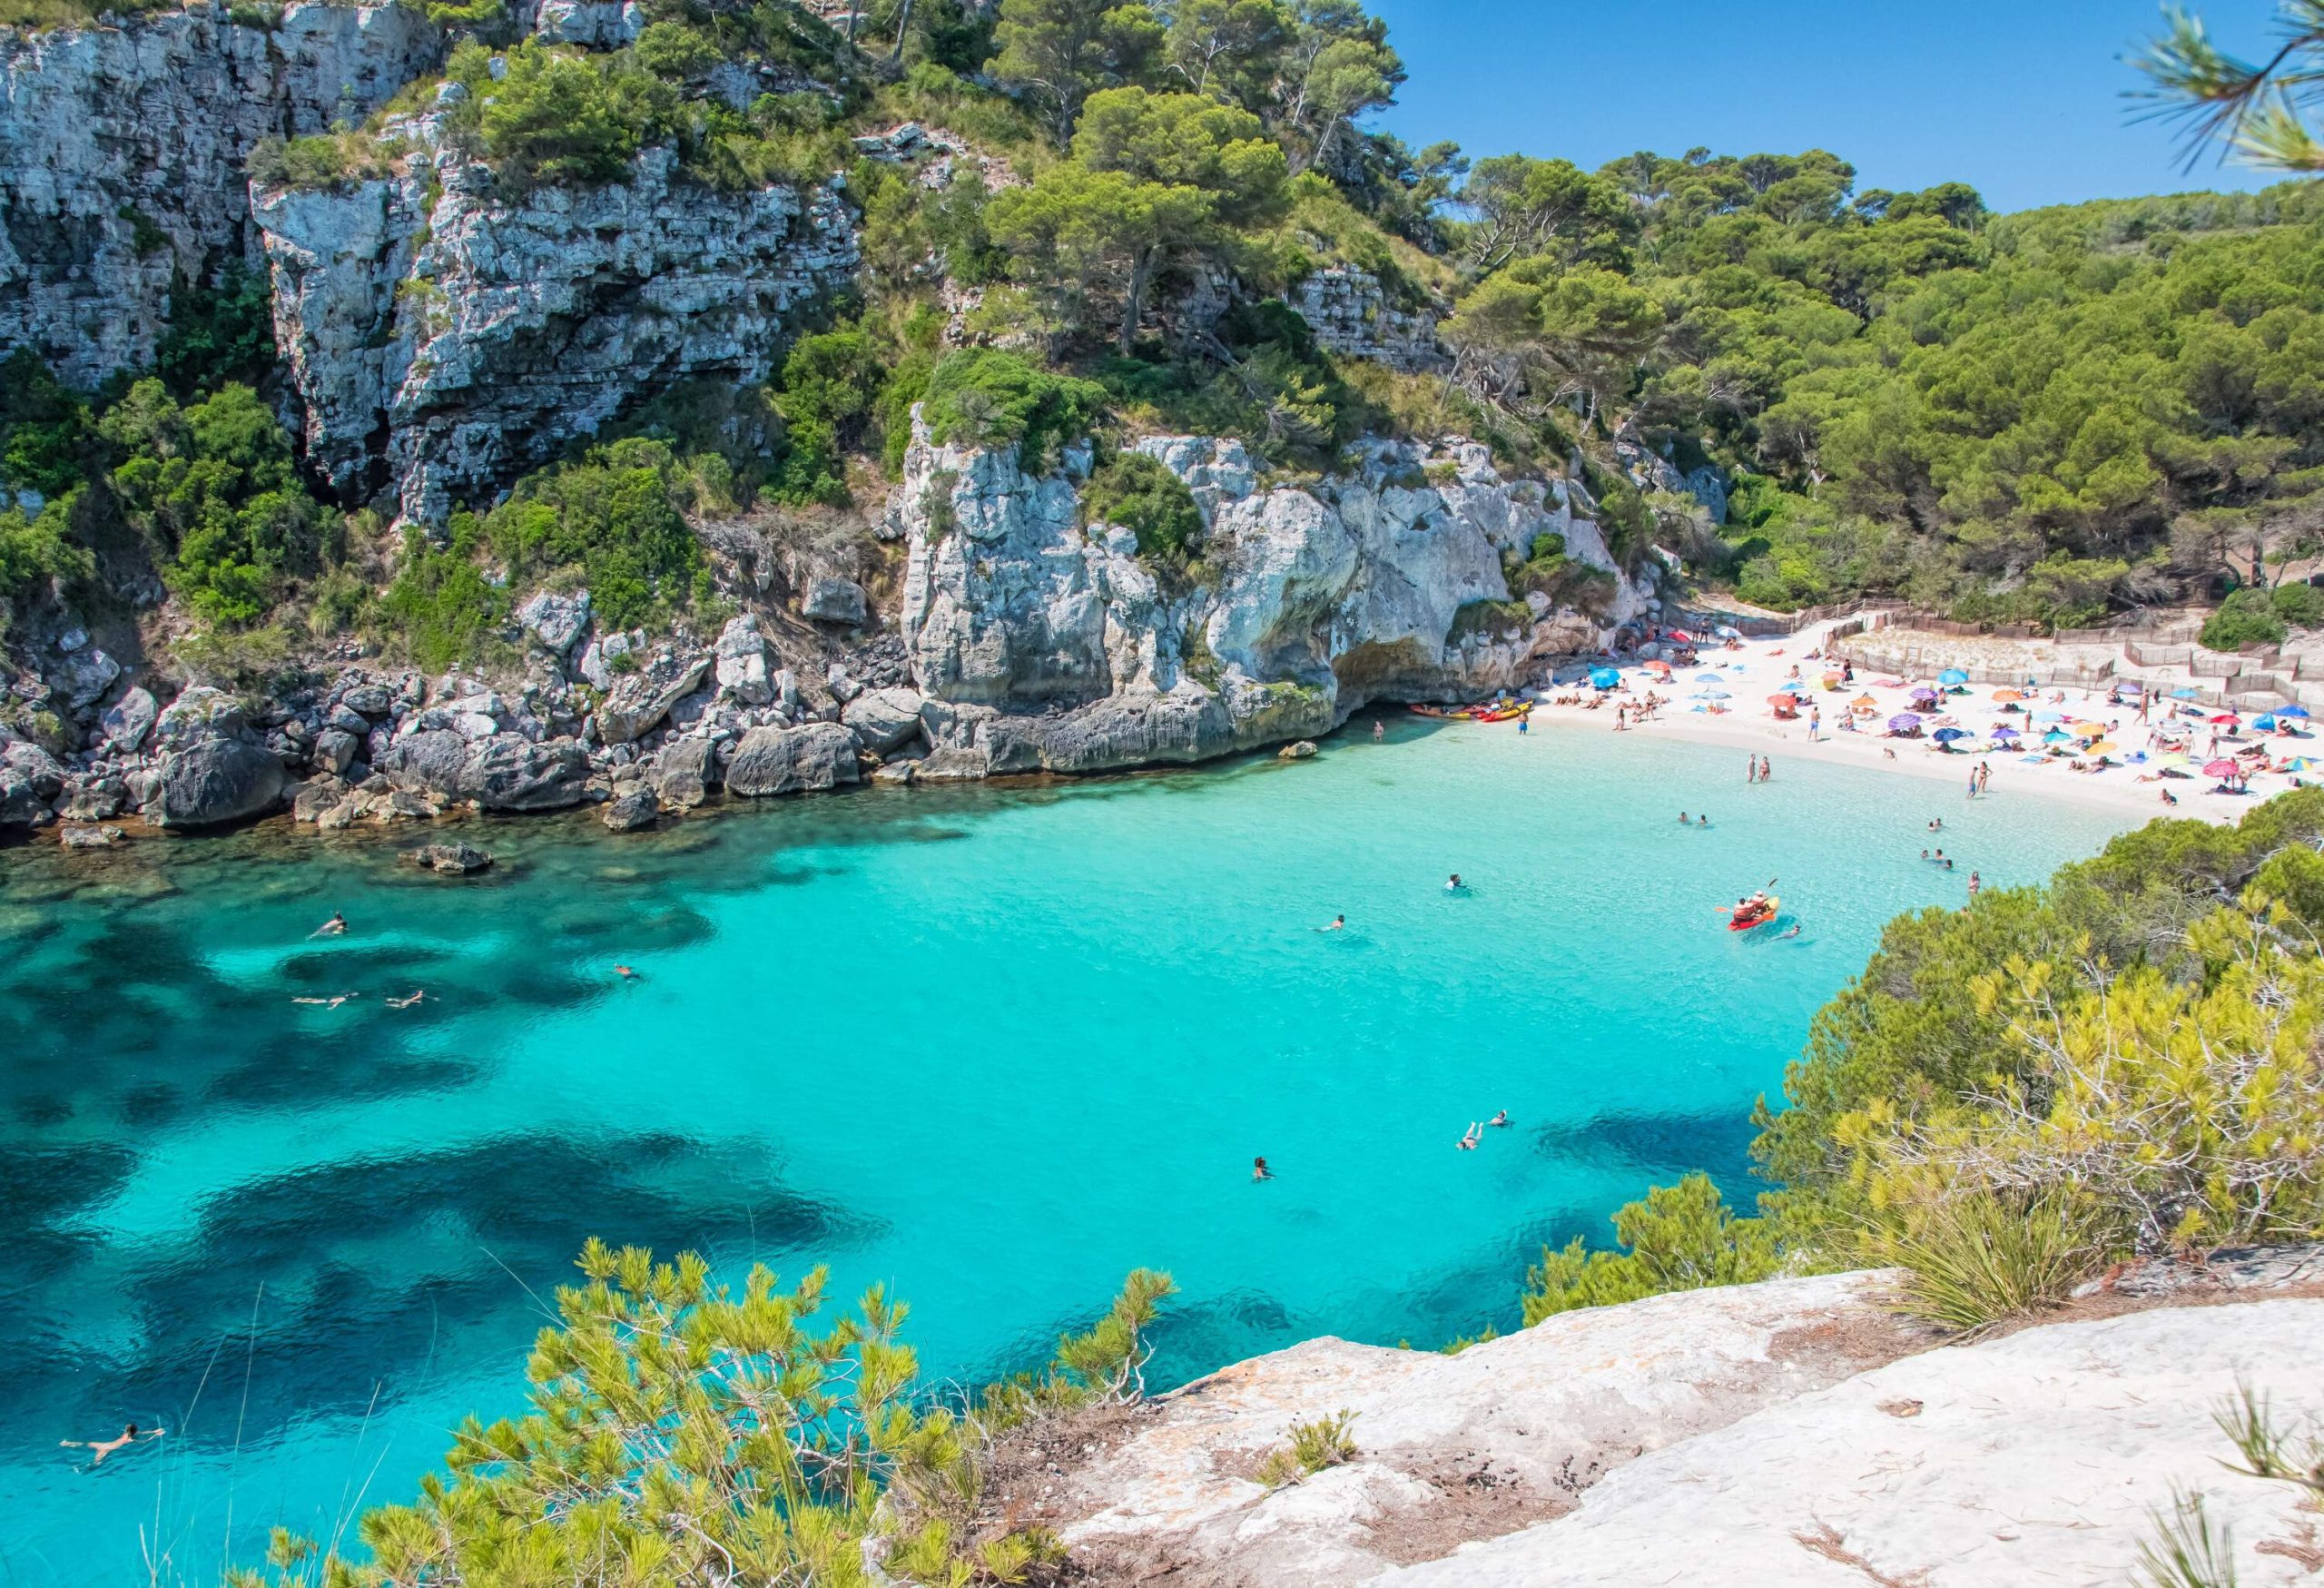 A narrow cove with people swimming in turquoise waters and relaxing on white sand.